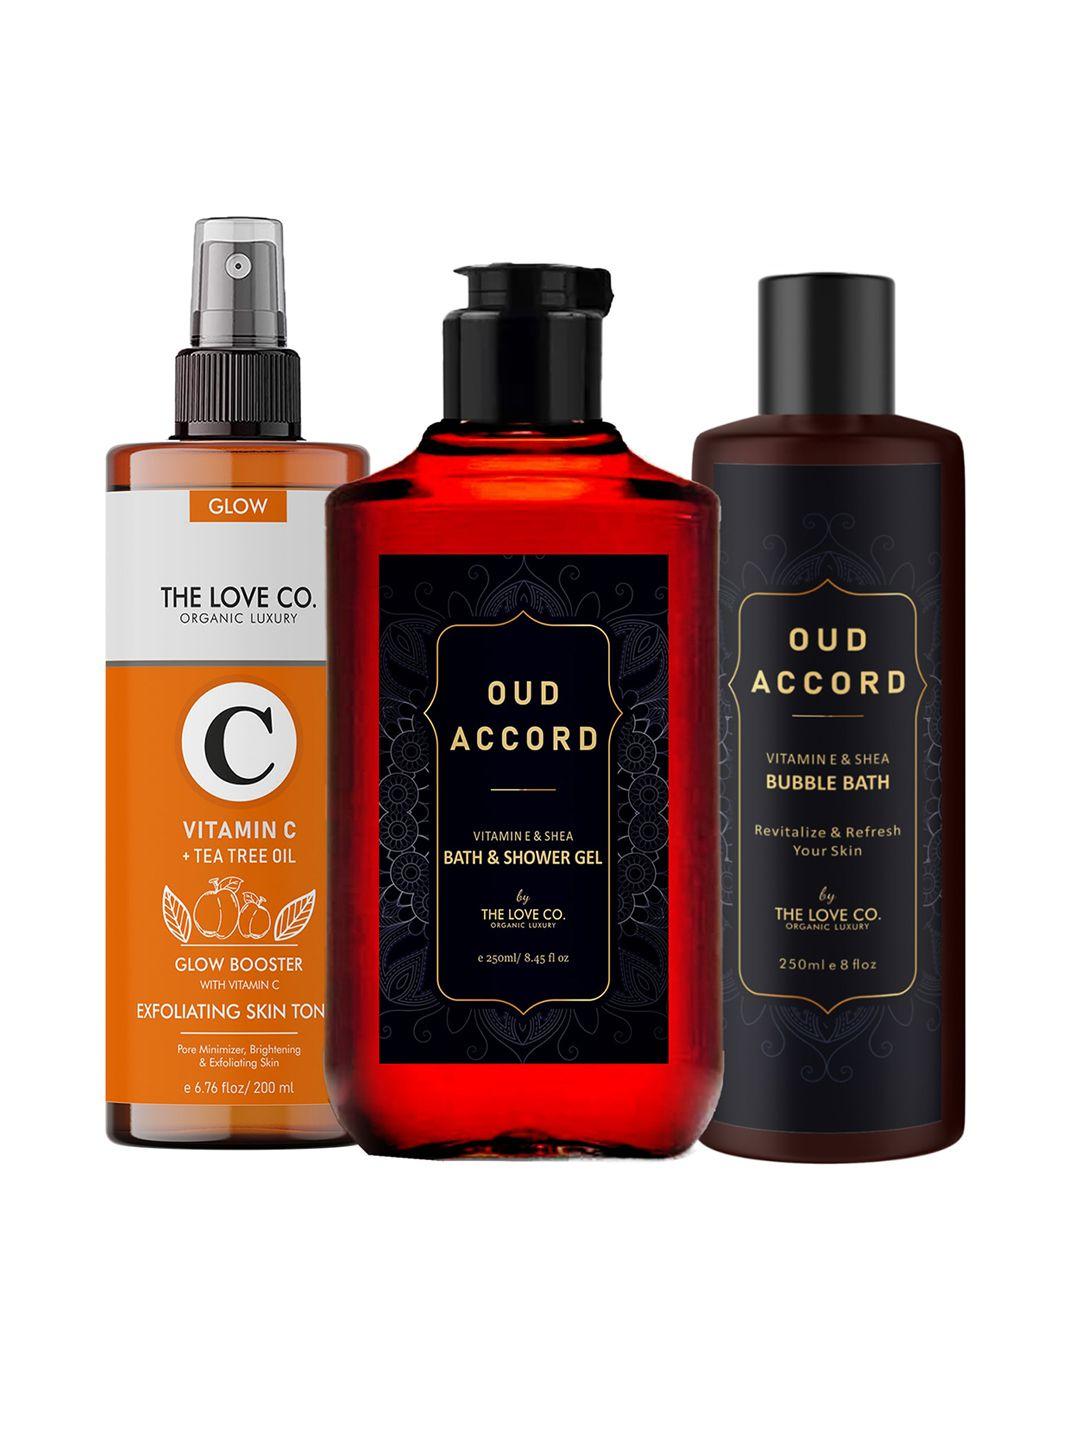 the love co. oud accord pack of 3 hand wash + body wash + vitamin c toner - 250ml each